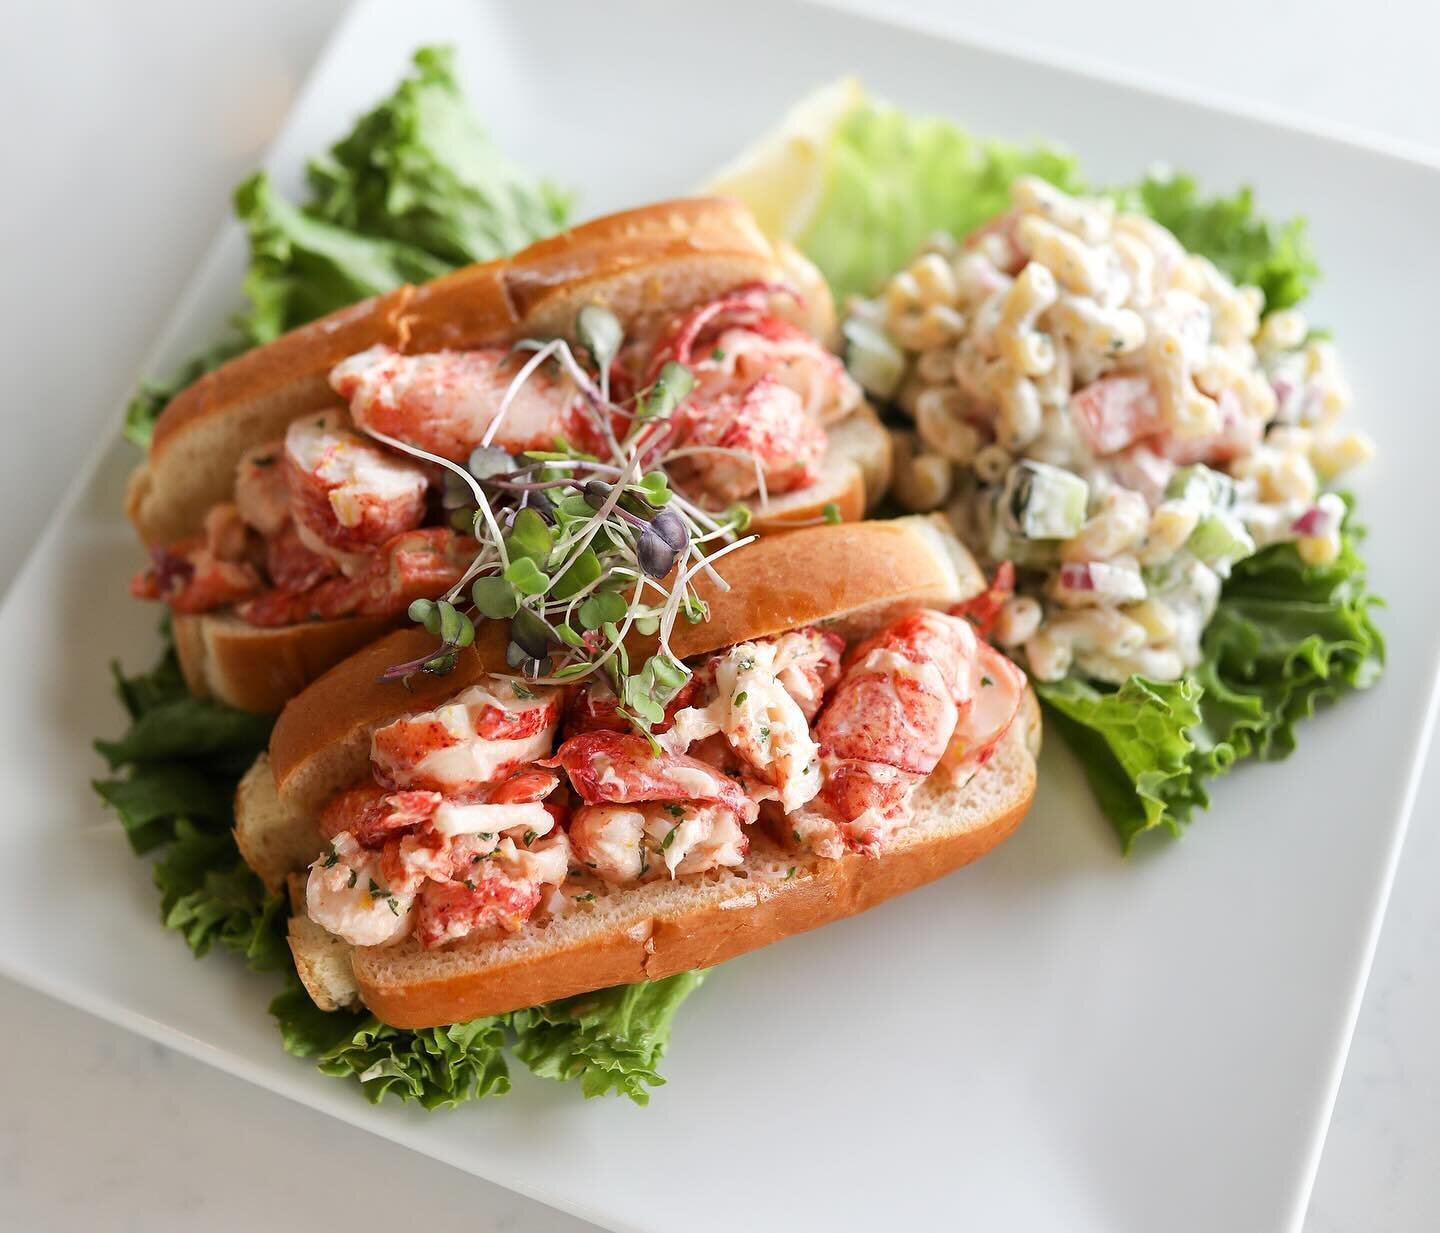 The countdown to our delicious Eggs Benedict, Twin Lobster Rolls, mouth-watering Cubano Panini, and more is on! Belle&rsquo;s Newport will re-open for the season on Weds., March 6th, here at @safeharbornewportshipyard. Join us for breakfast or lunch 